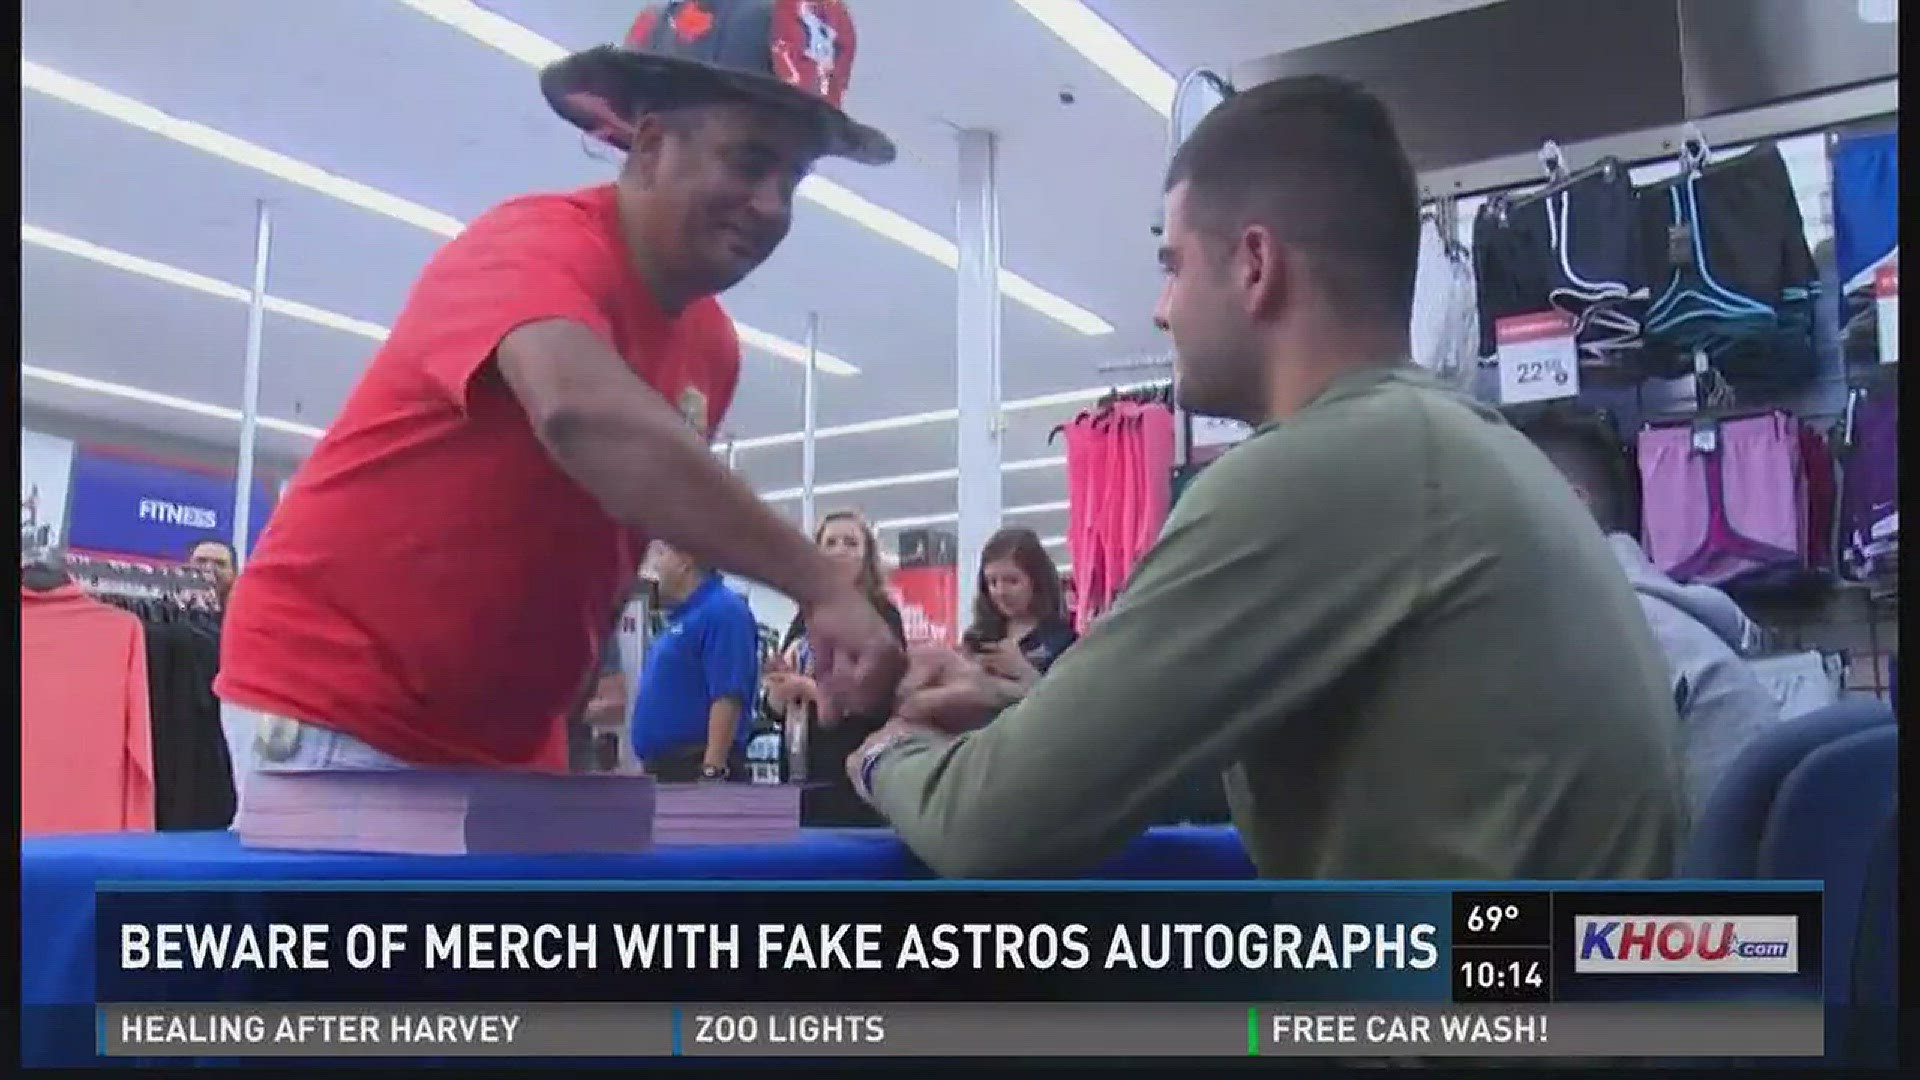 Beware of merchandise with fake Astros autographs